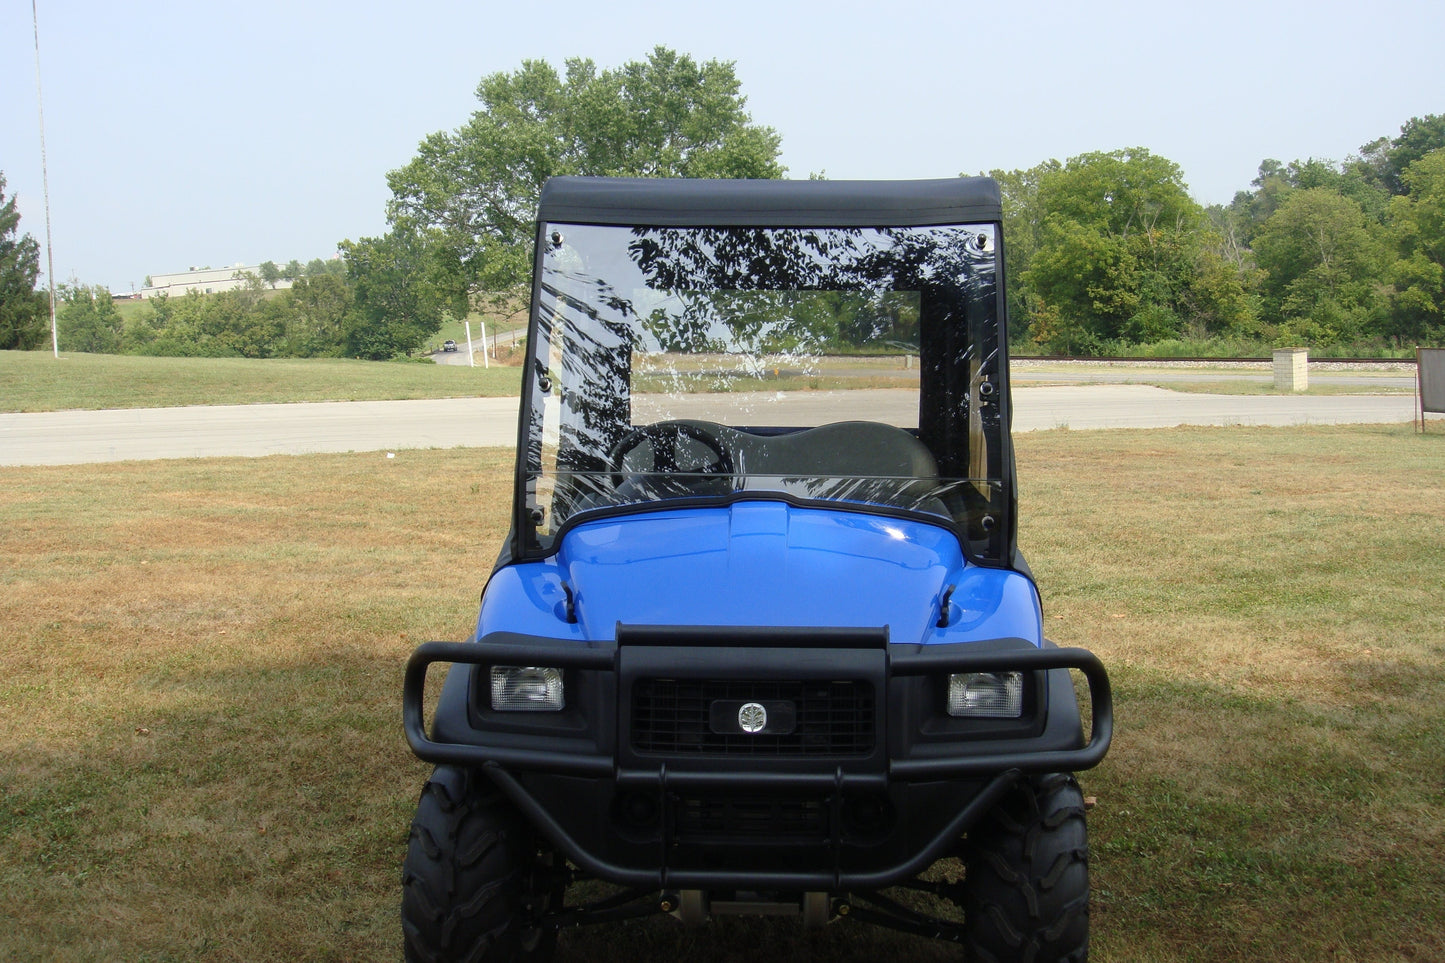 New Holland Rustler 120/125 - 2 Piece Vented Windshield w/Clamp and Hard Coat Options - 3 Star UTV